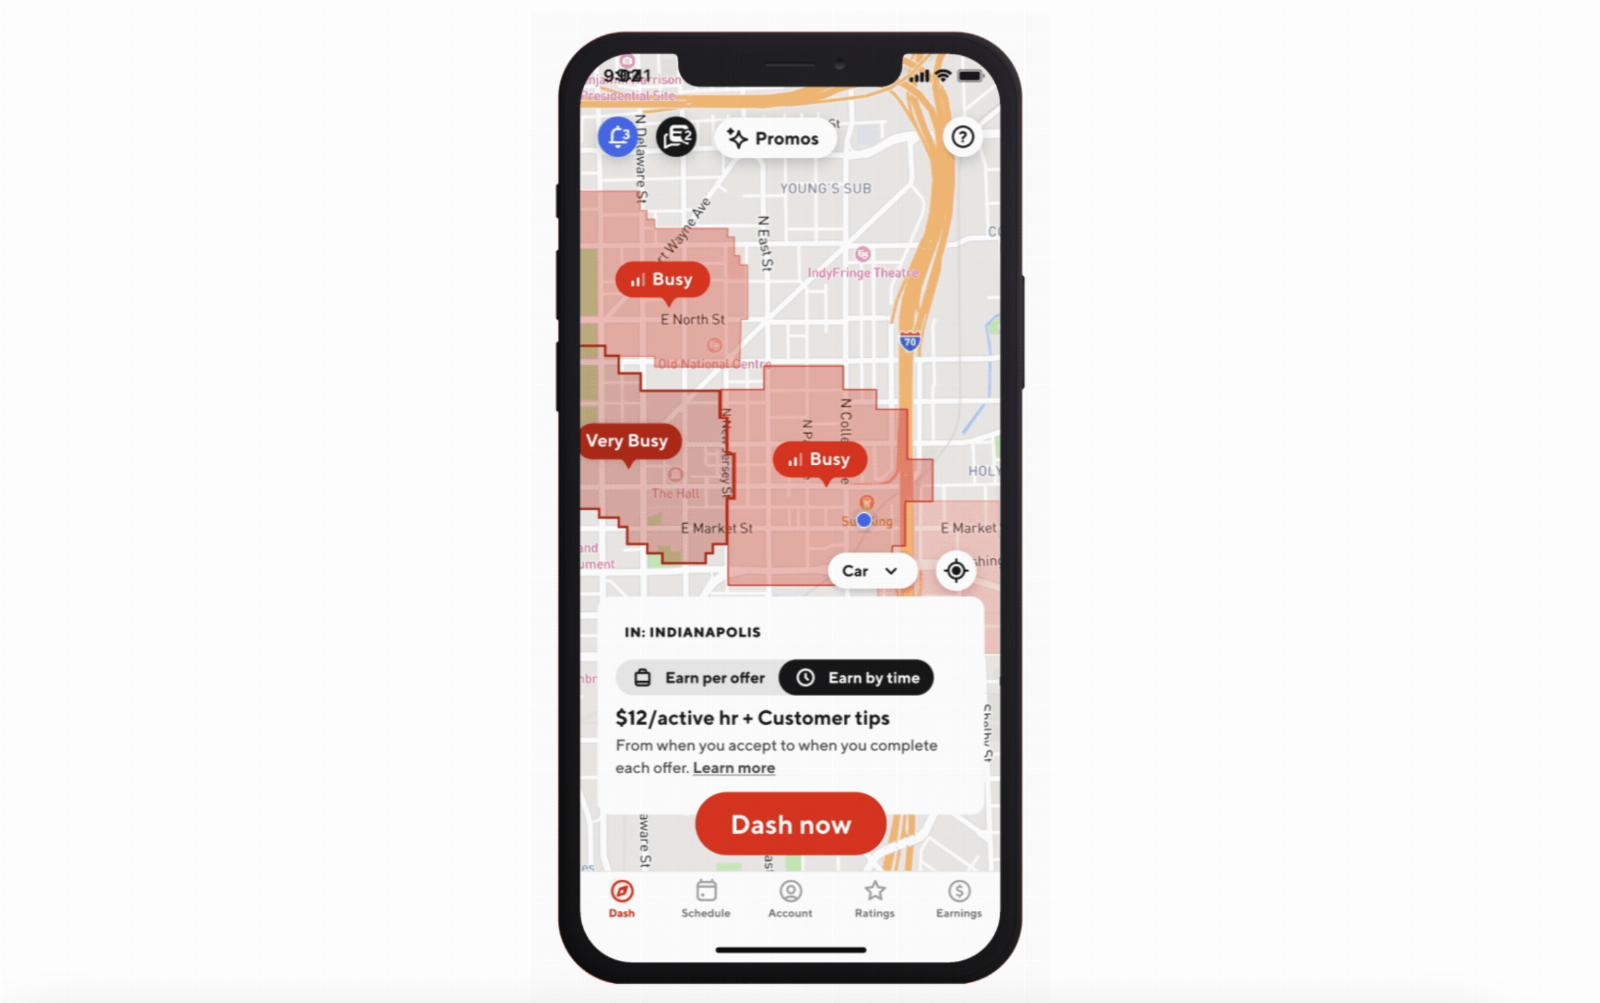 DoorDash introduces a slew of new features, including an ‘Earn by Time’ option for delivery people